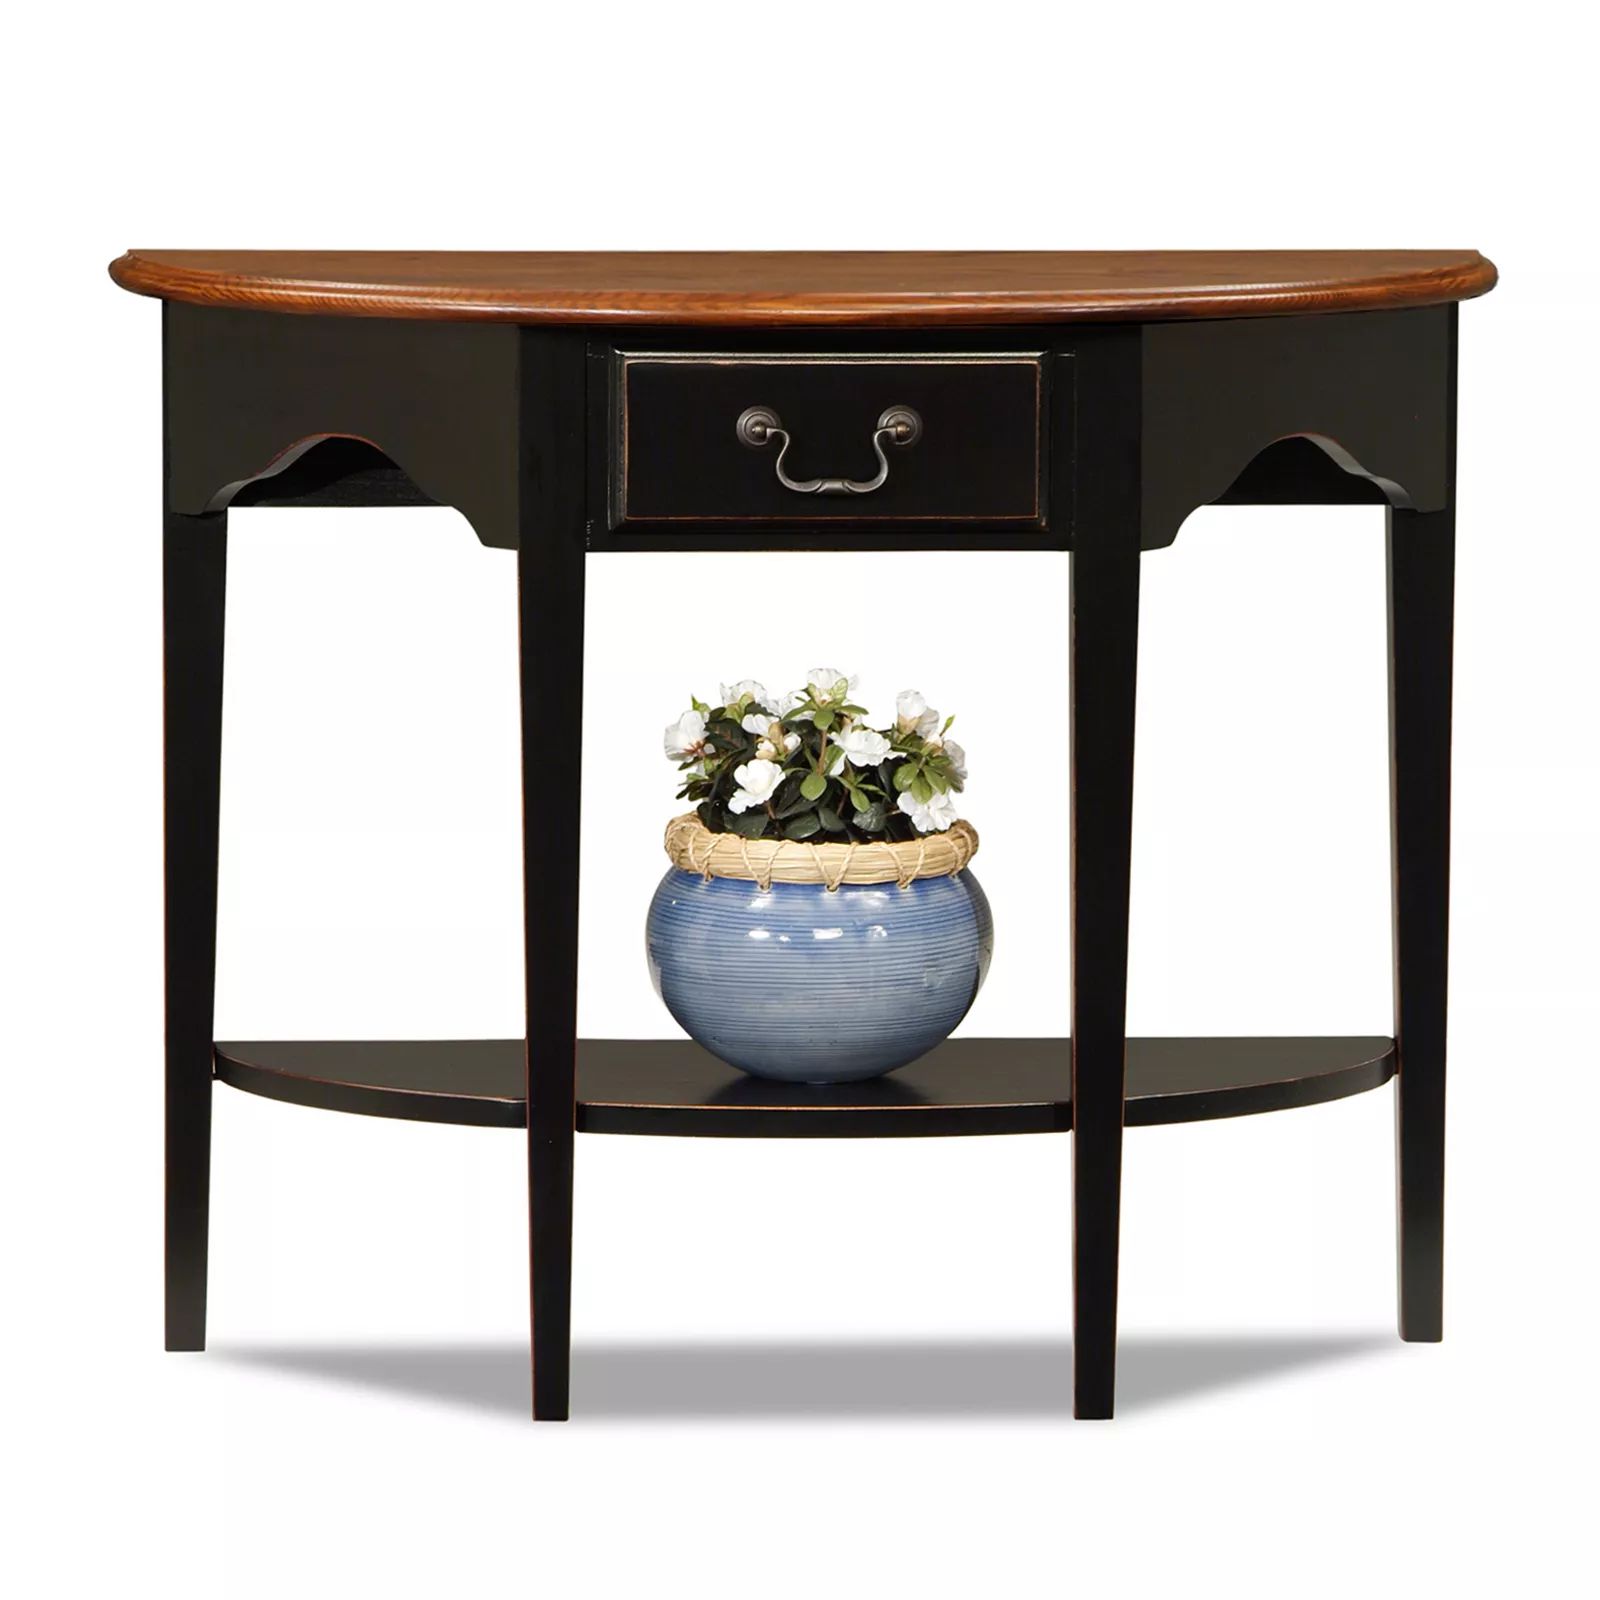 Leick Furniture Demilune Table, Brown | Kohl's